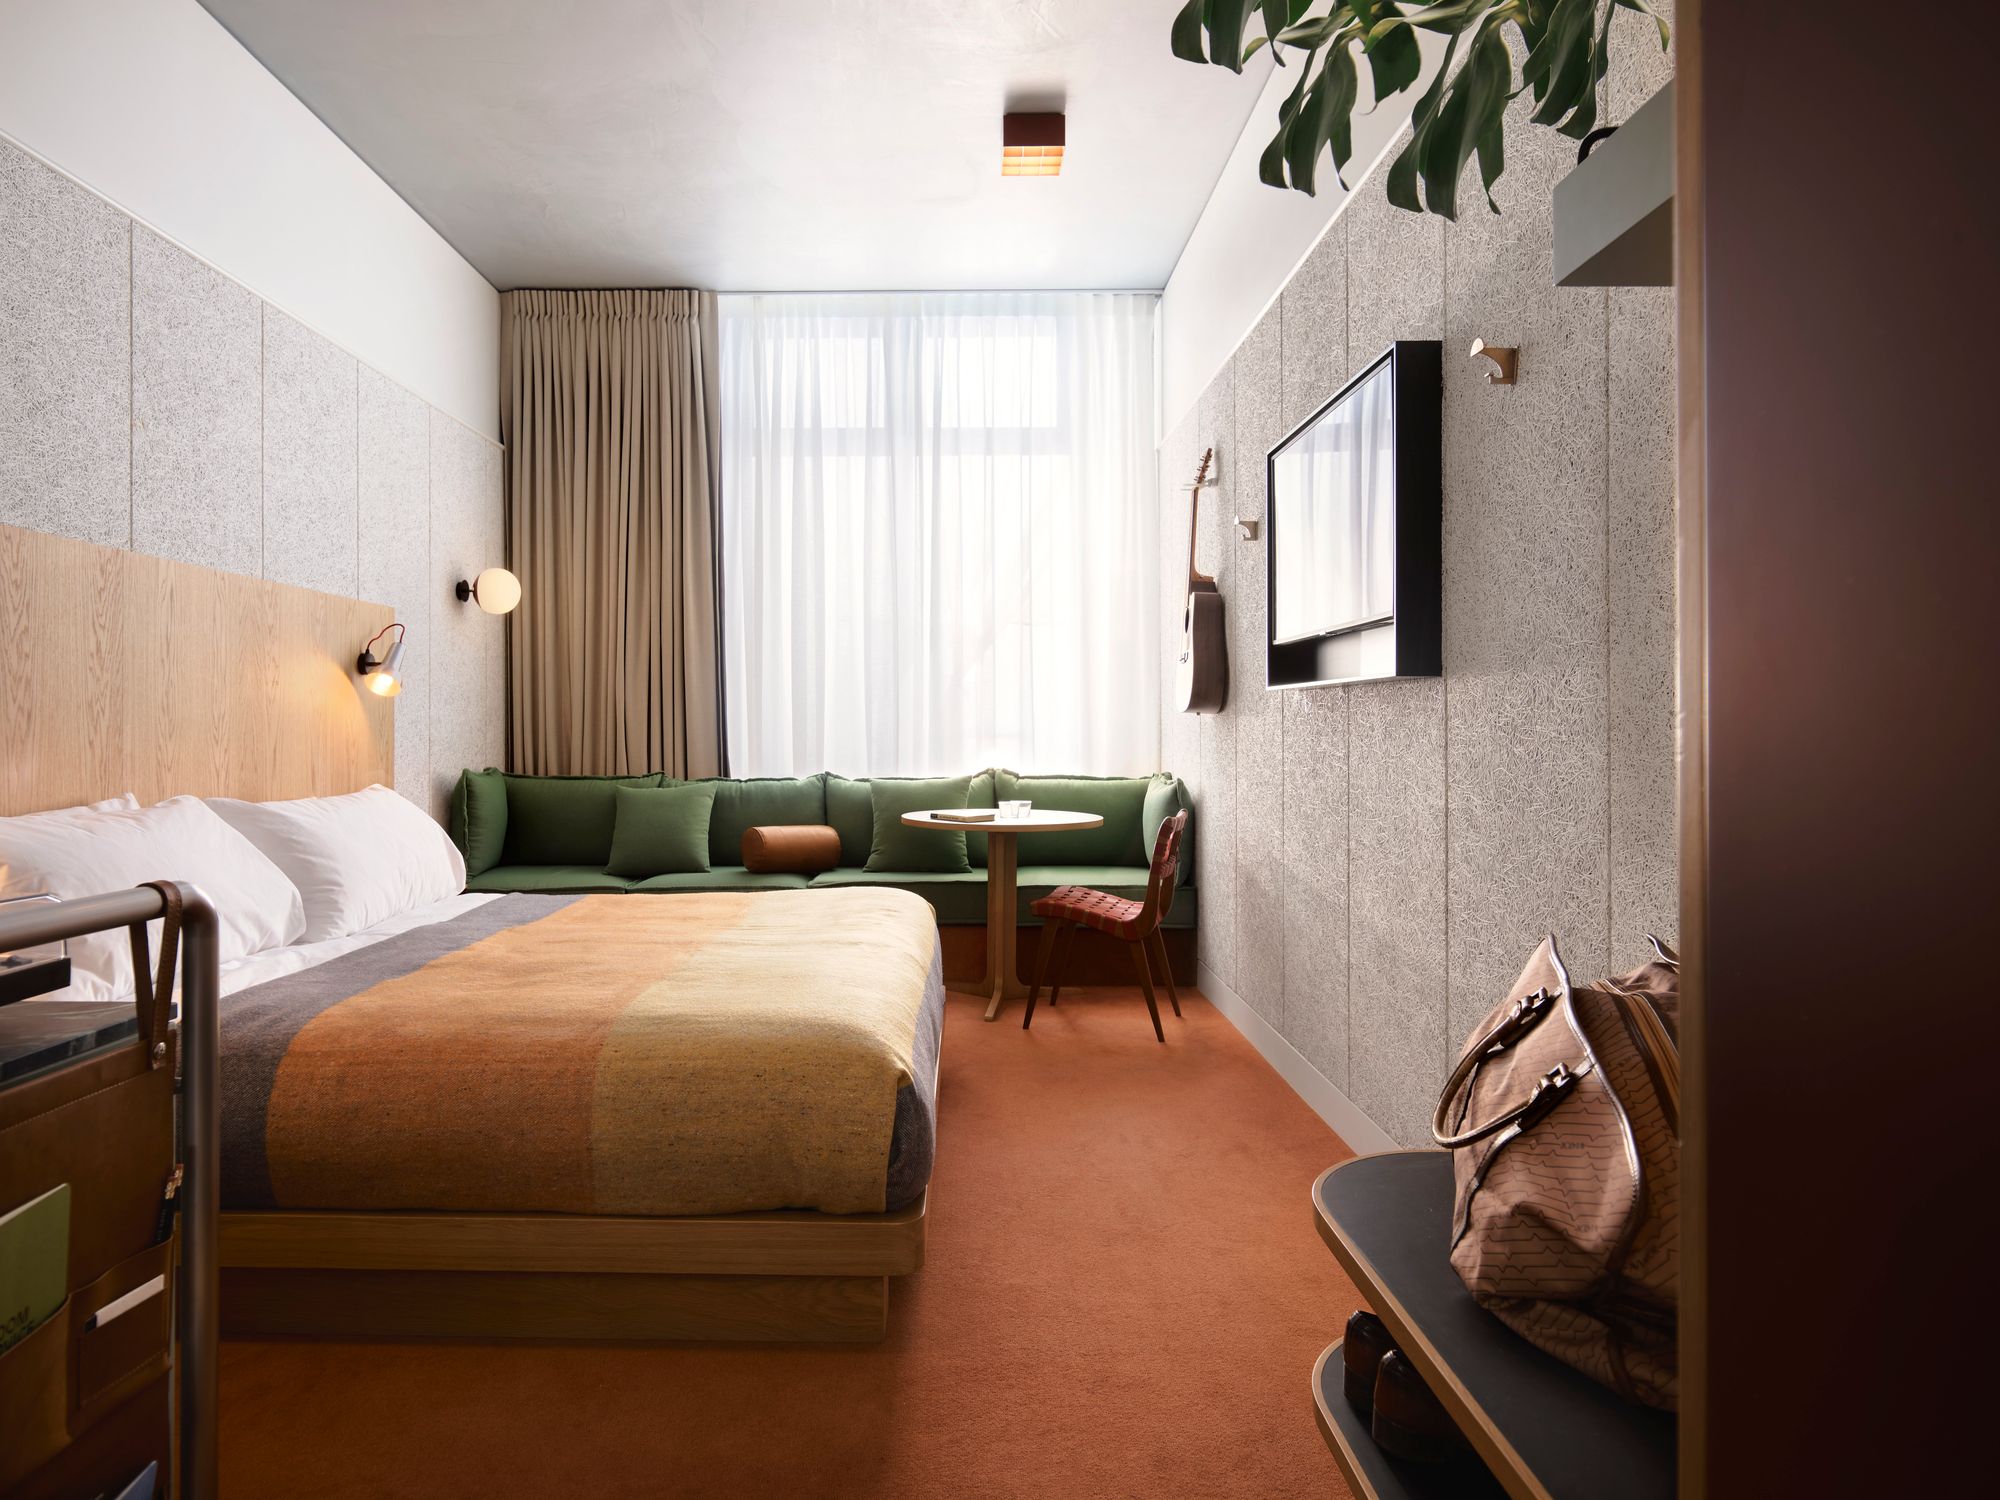 Ace Hotel Sydney. Medium sized room option for guests. 